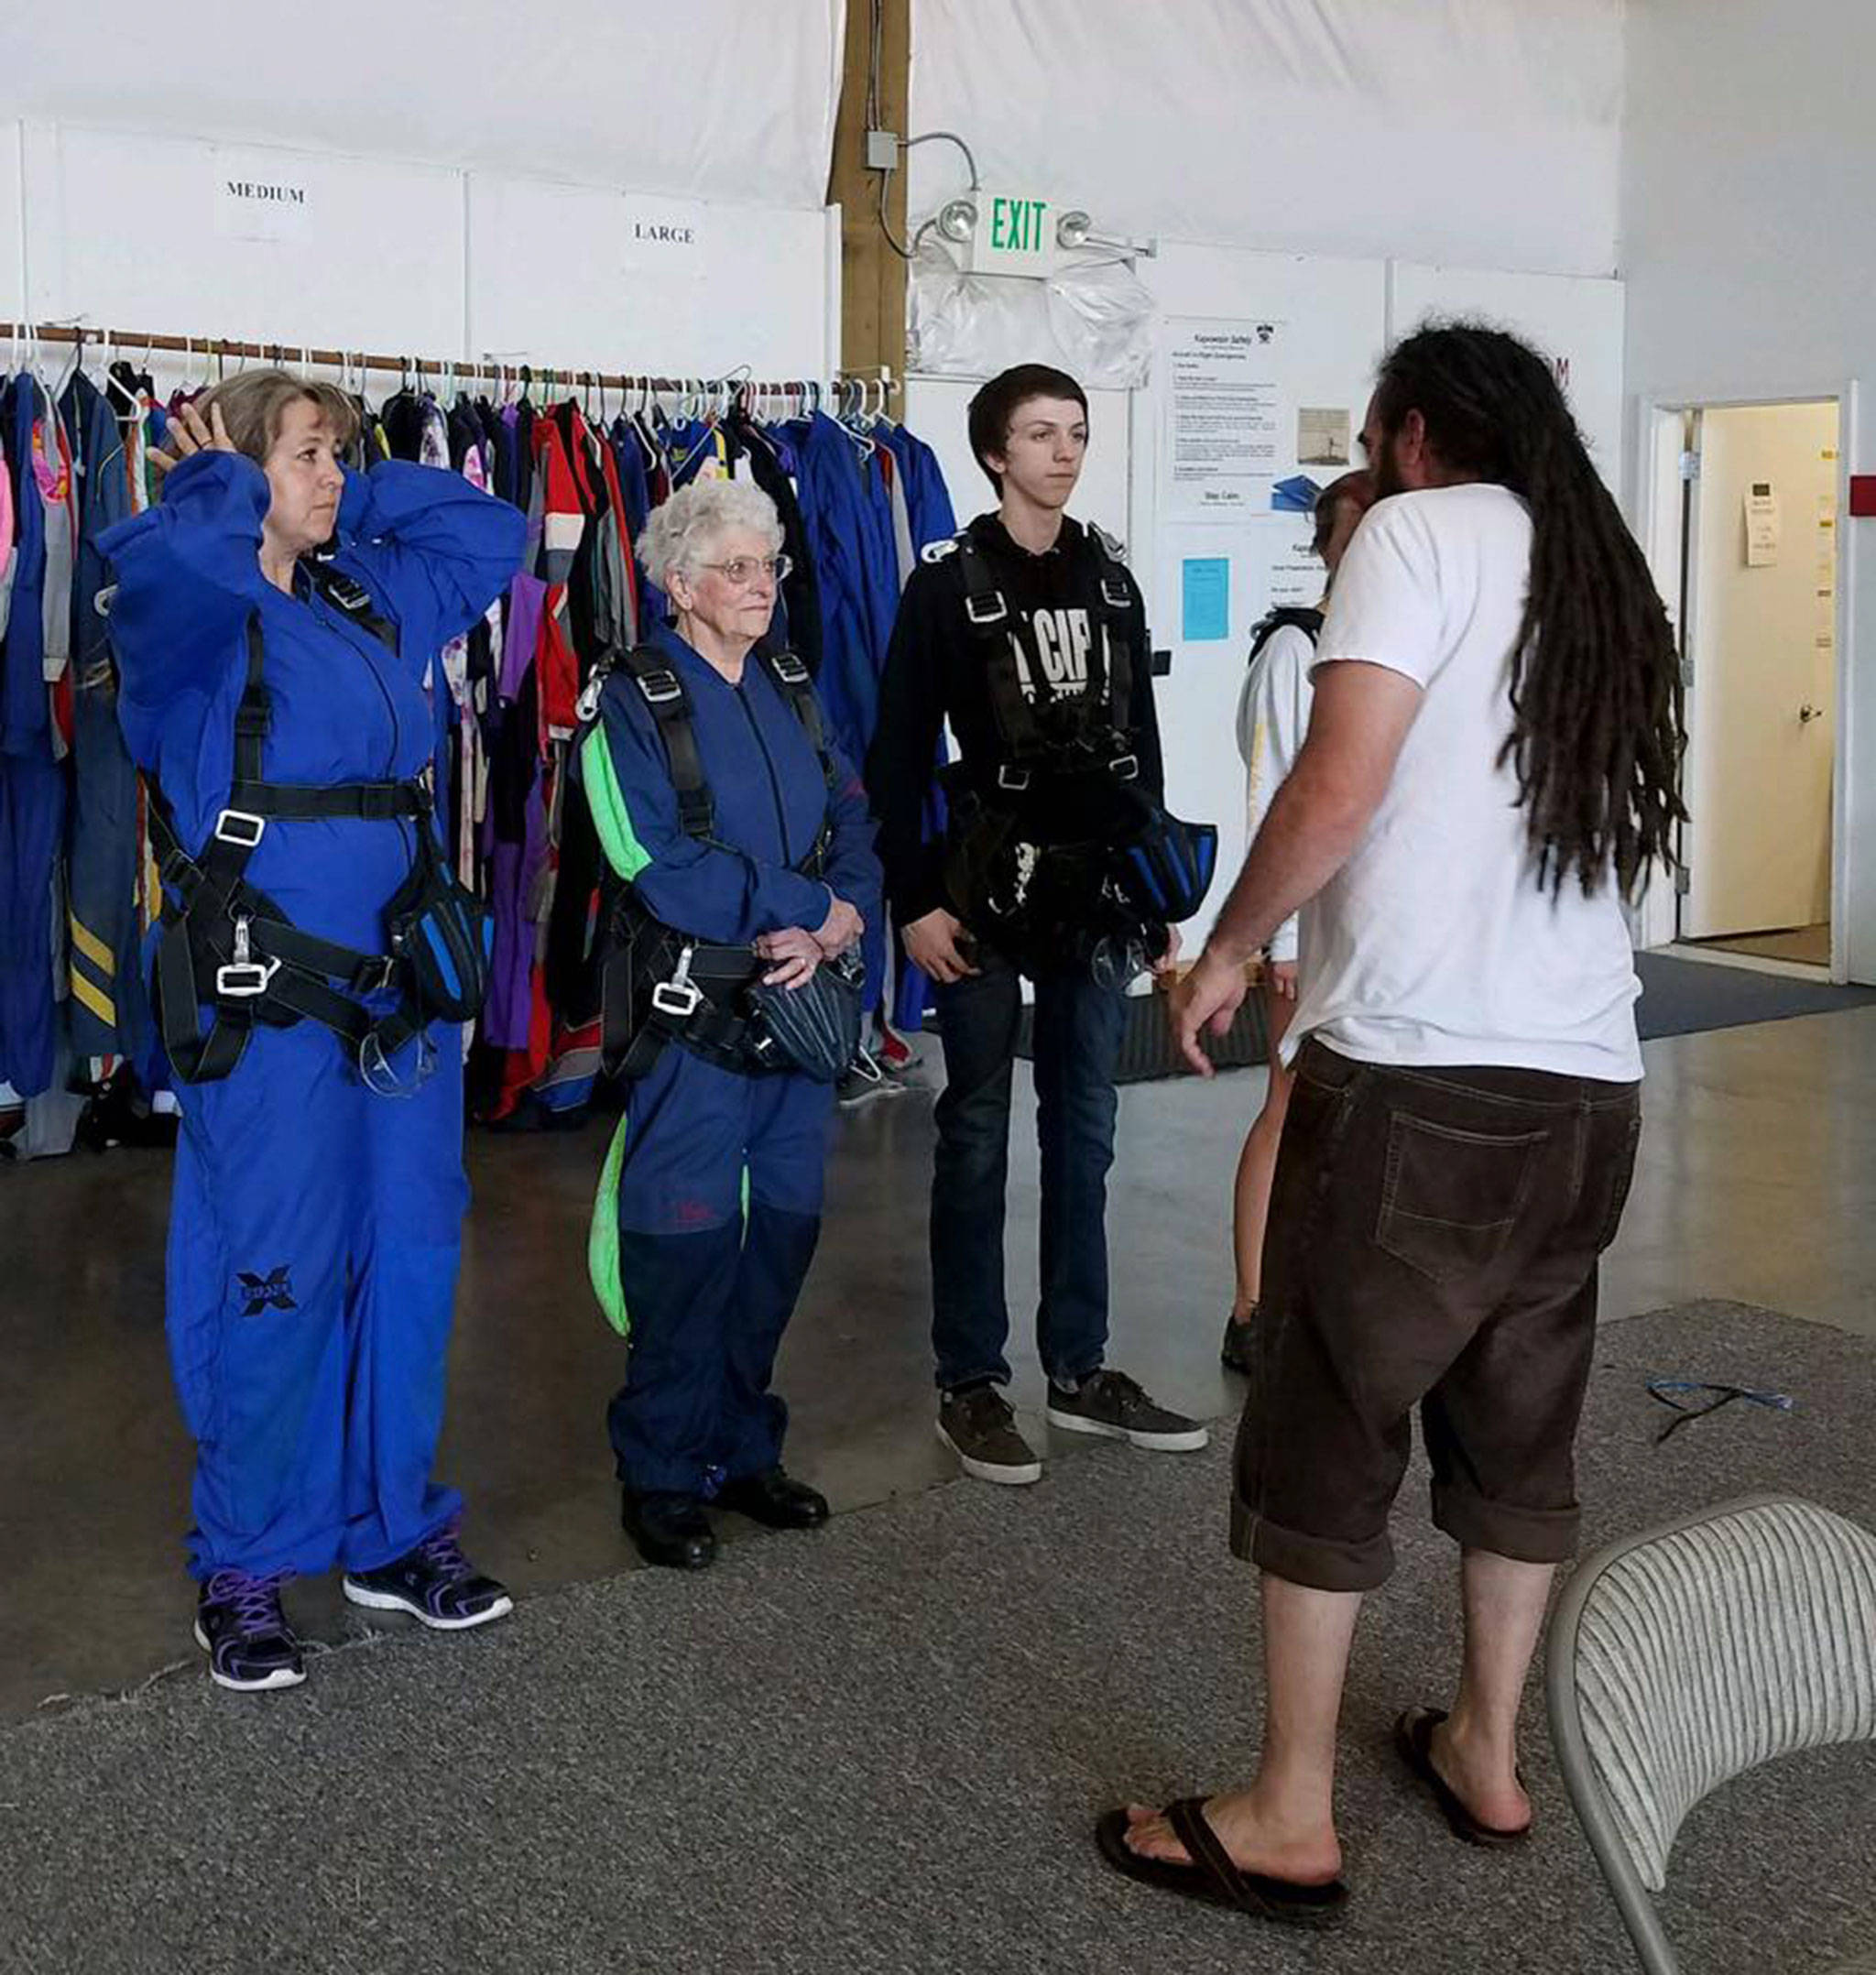 Family members, from left, Darcy Lamb, Clairee Meeks and Connor Lamb listen to an instructor with Skydive Kapowsin in Shelton on Aug. 25. The trio jumped together for the first time that day. It was Meeks’ sixth time. Photo courtesy of Clairee Meeks